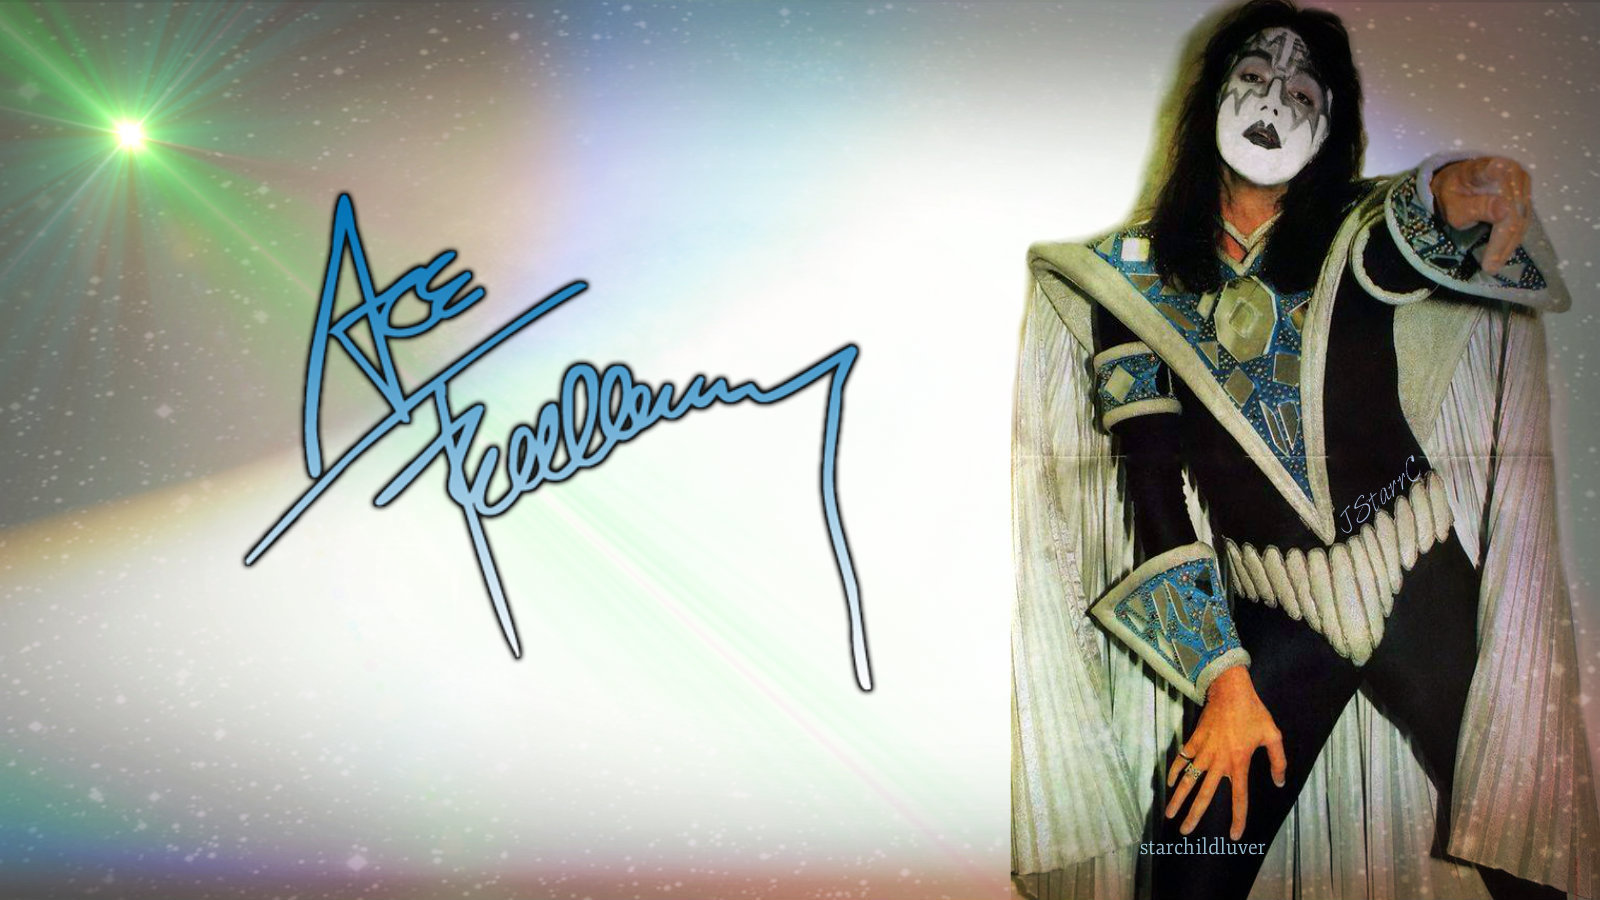 wallpaper of Ace Frehley for fãs of kiss 39391015. wallpaper of Ace Frehley for f...